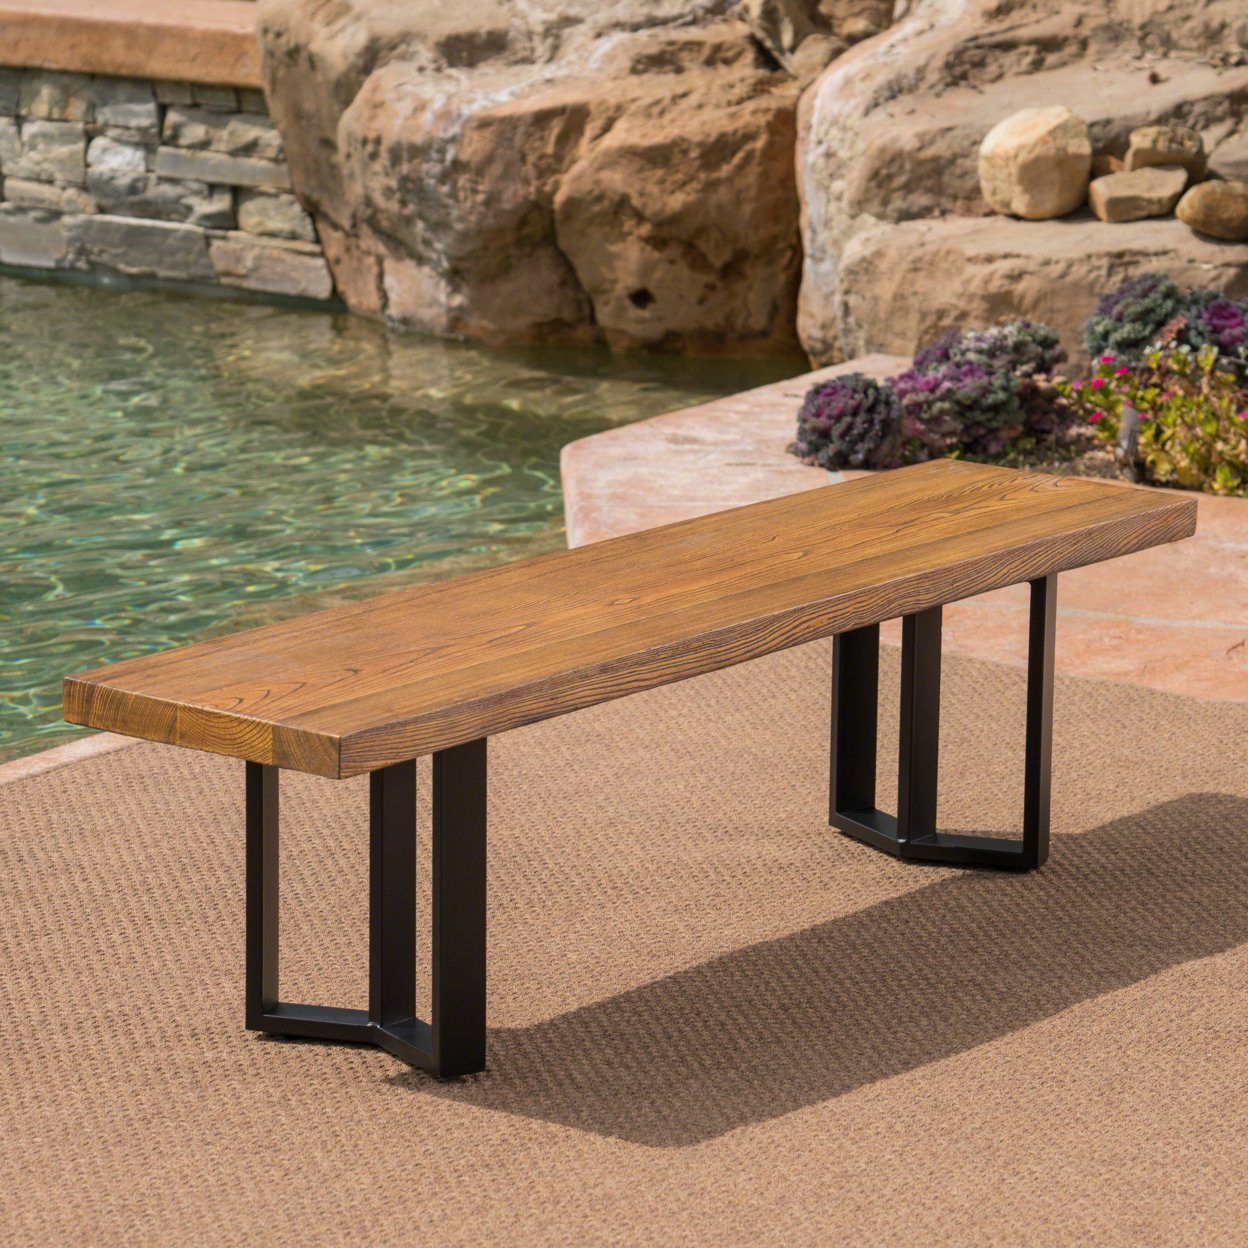 Santa Rosa Outdoor Finish Light Weight Concrete Dining Bench - Textured Gray